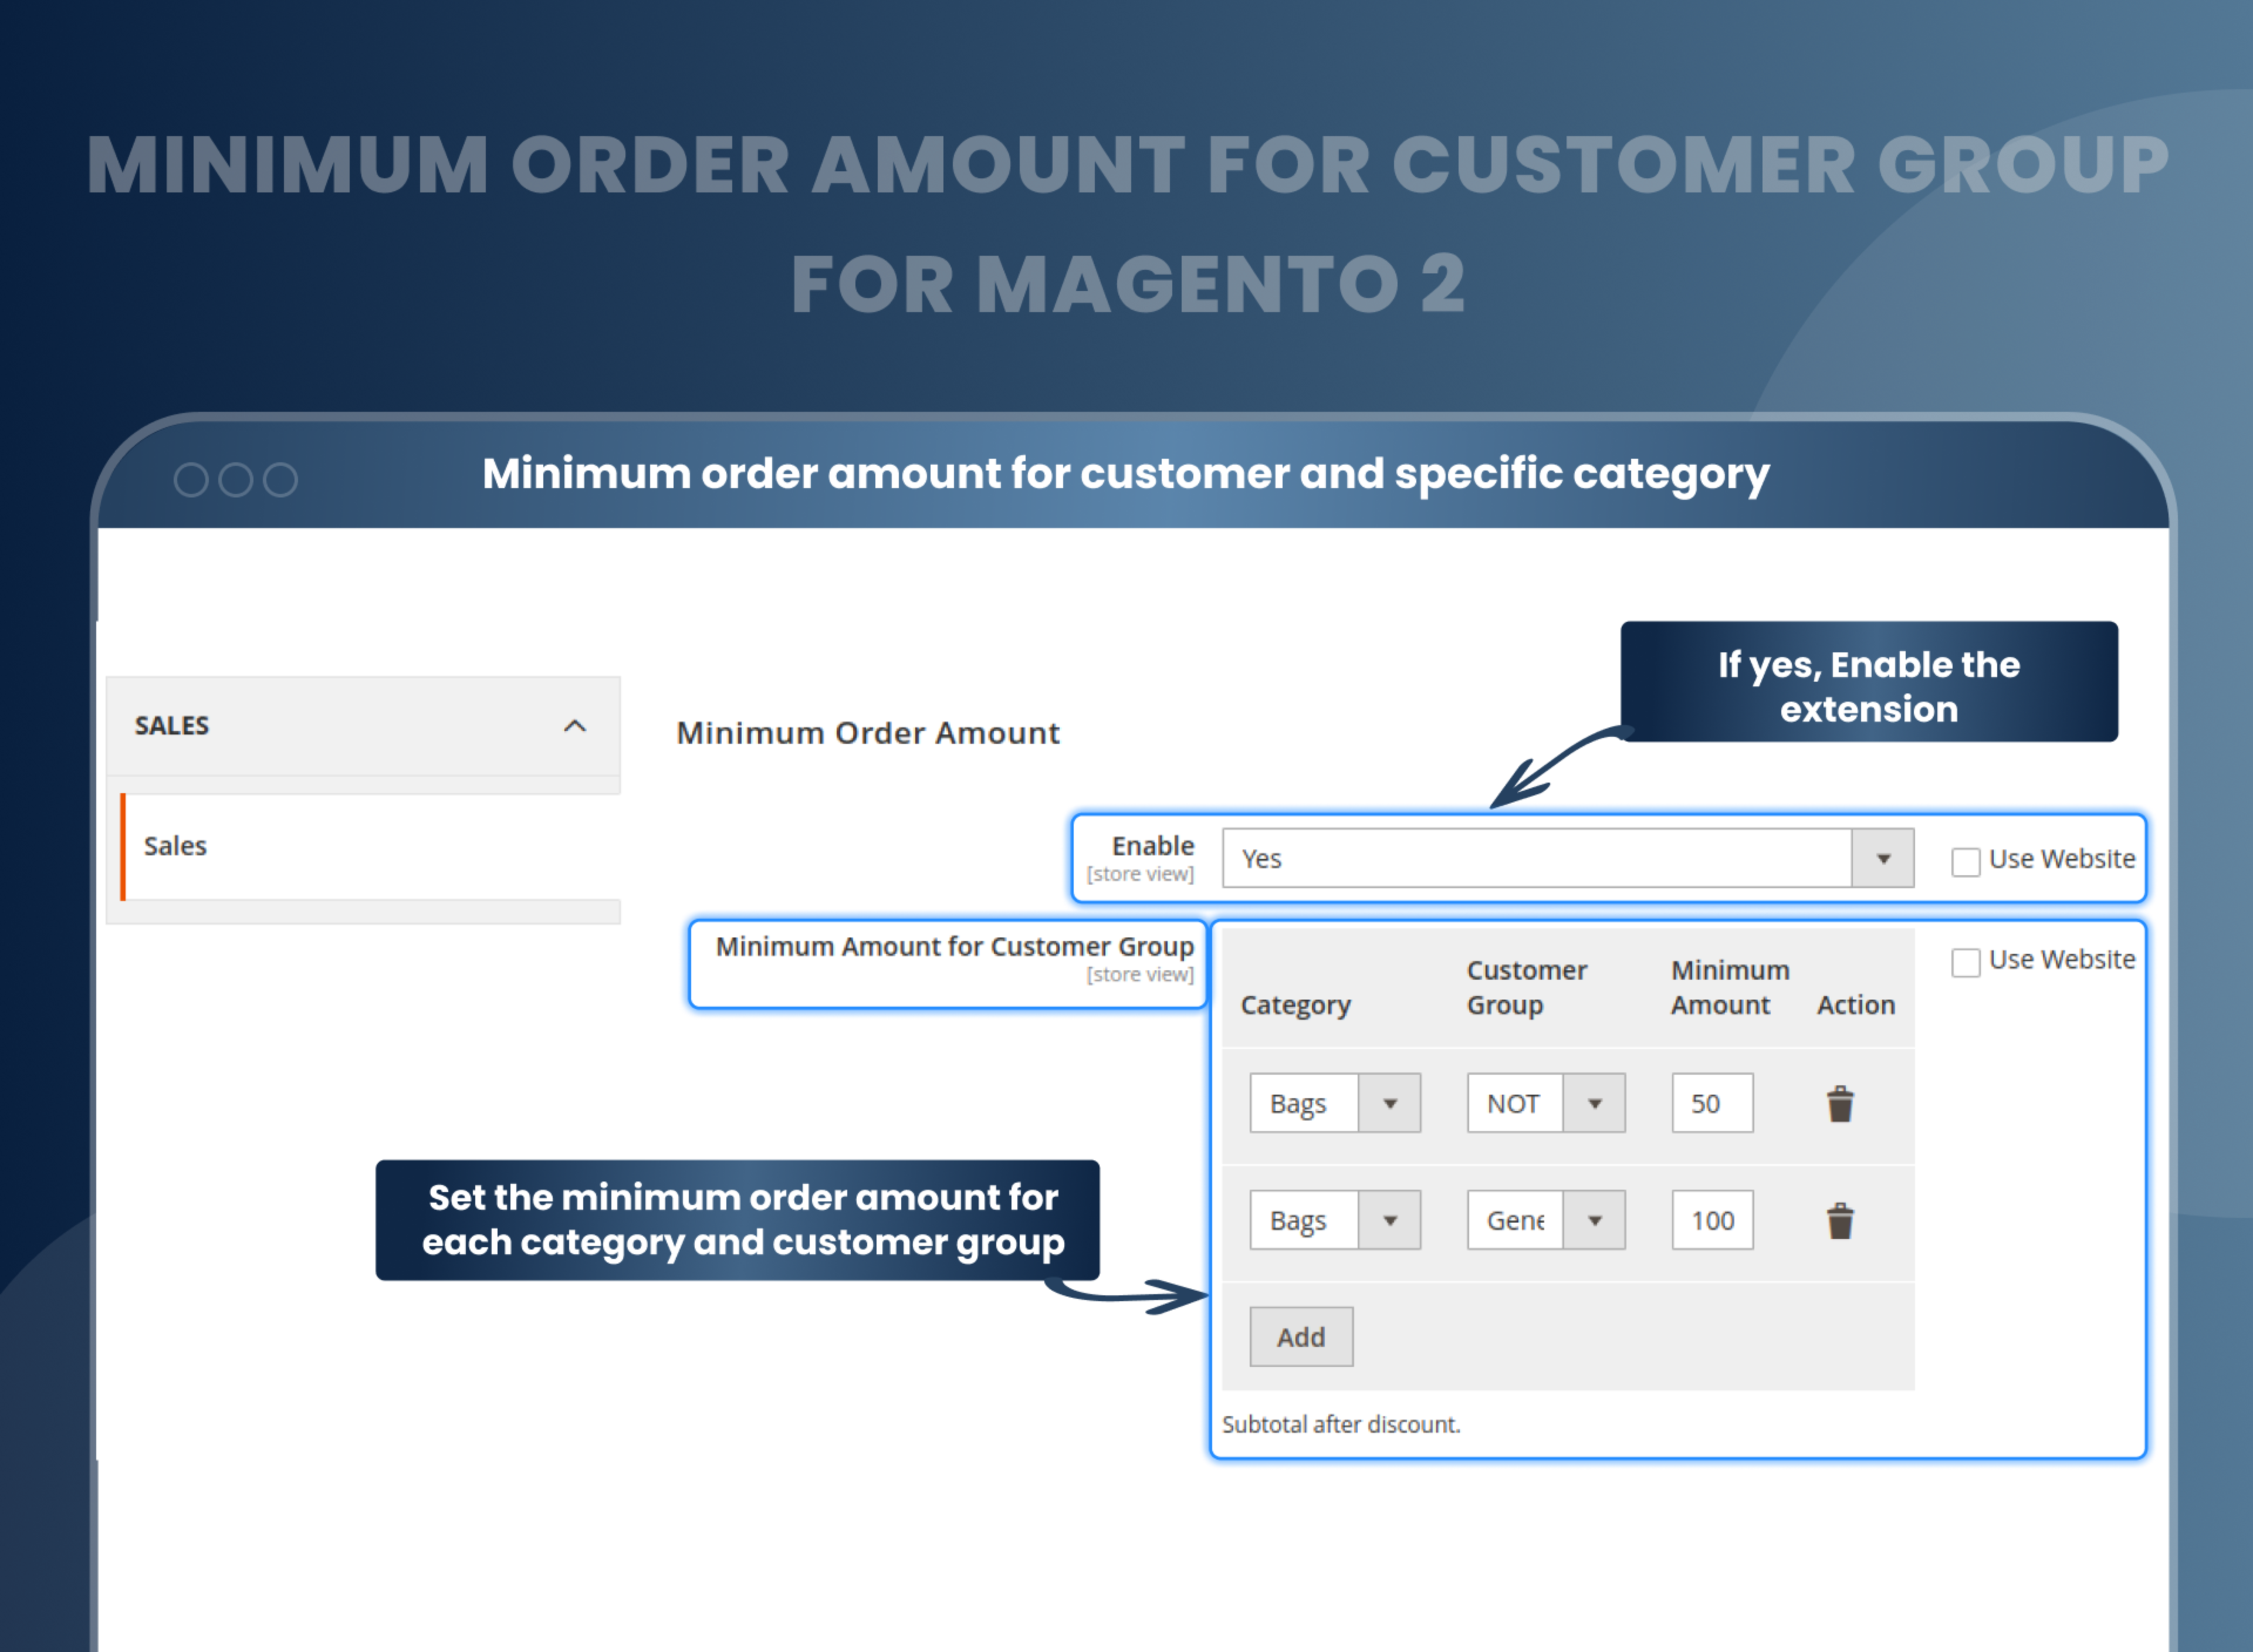 Minimum order amount for customer and specific category